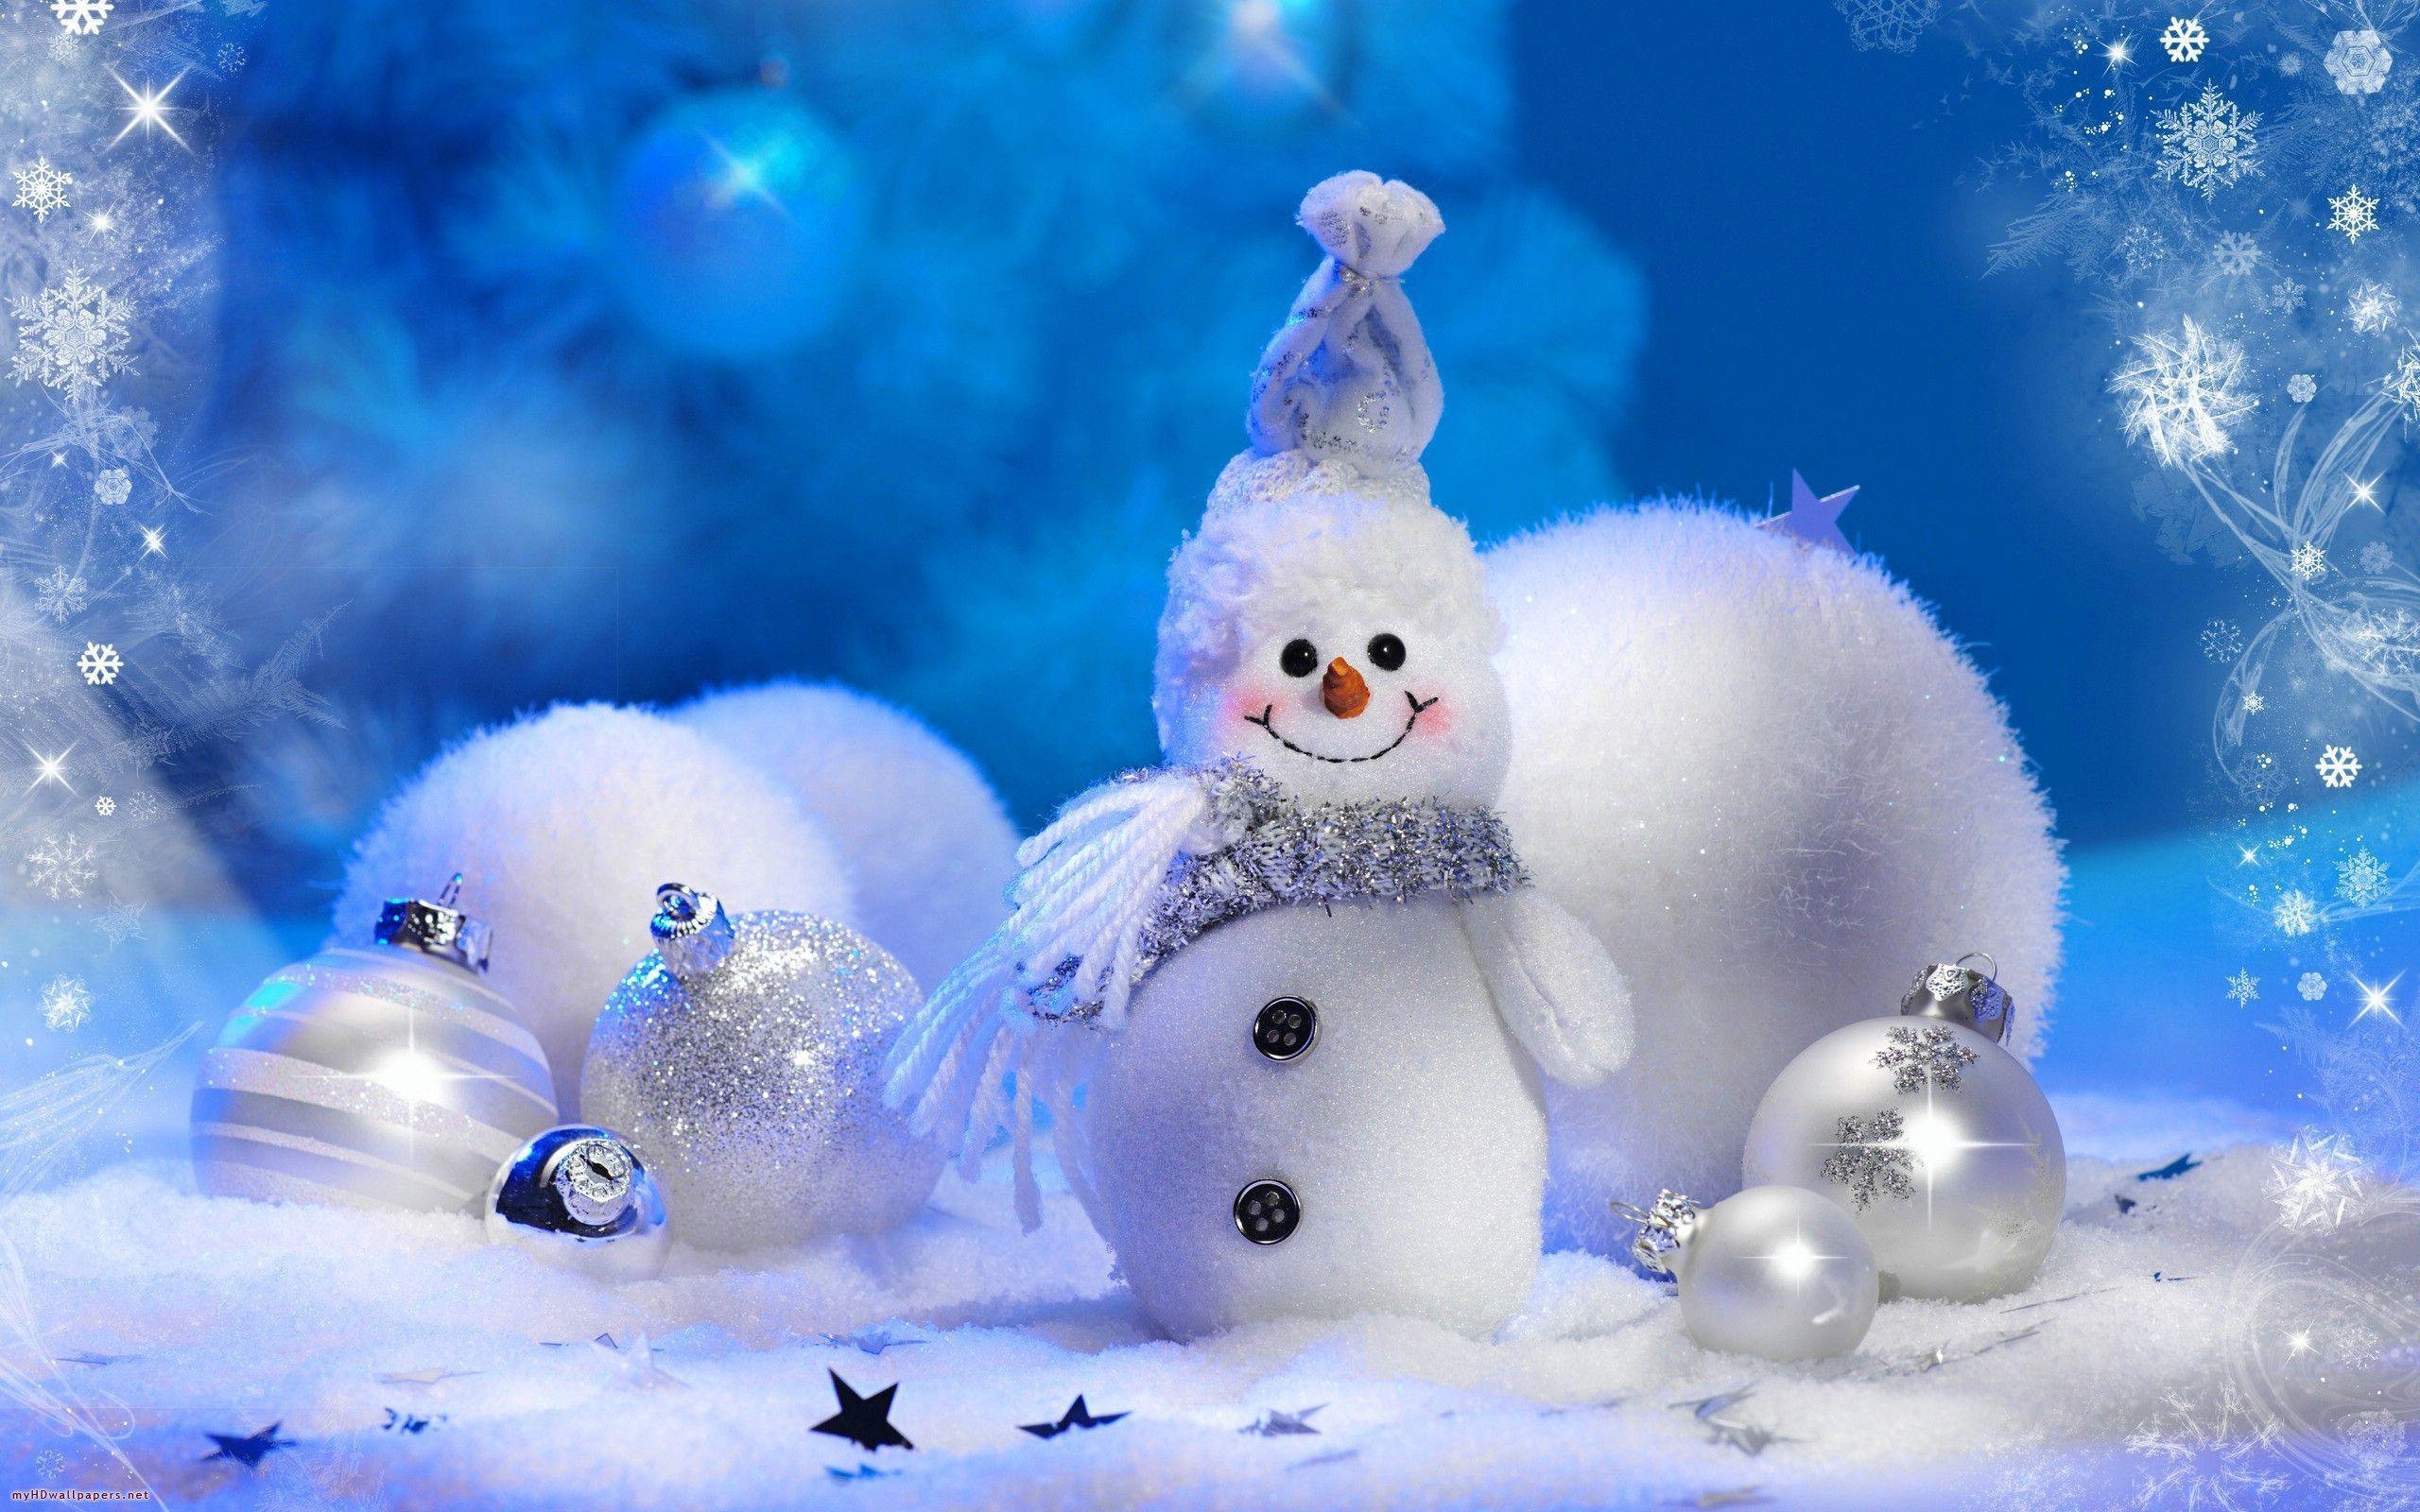 1000 Best Snowman Pictures for Free HD  Pixabay